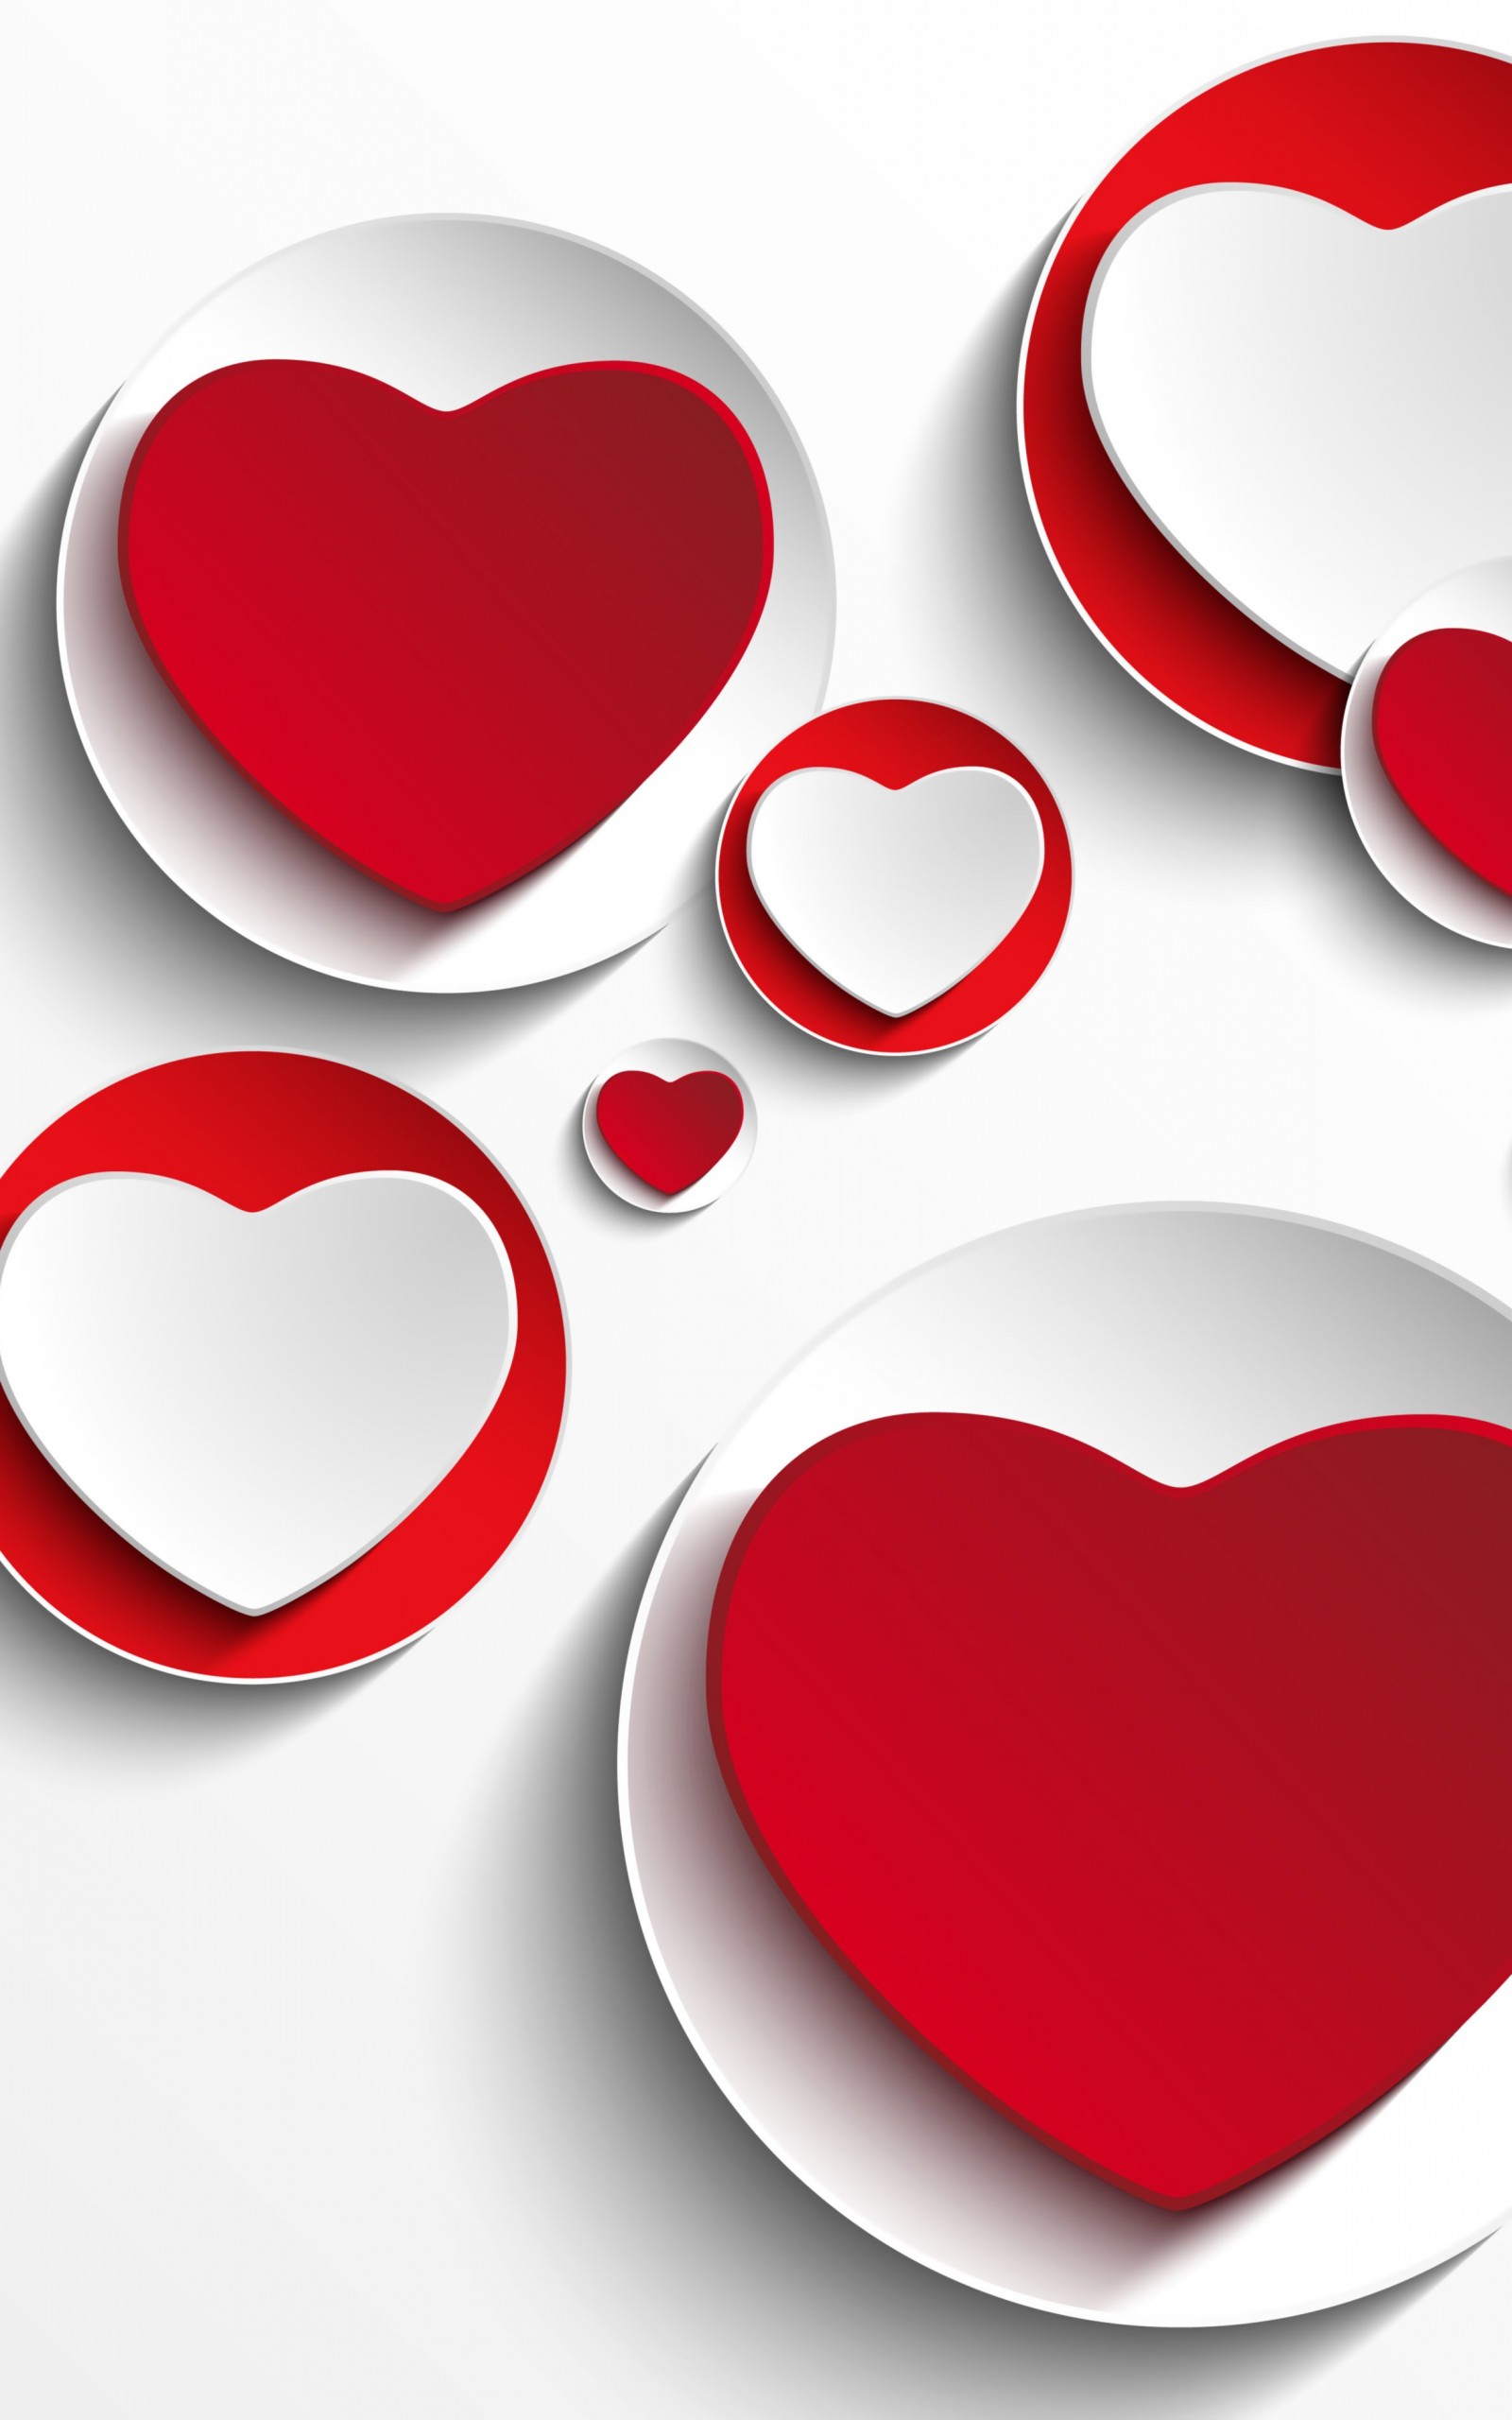 Minimalistic Hearts Shapes Wallpaper for Amazon Kindle Fire HDX 8.9